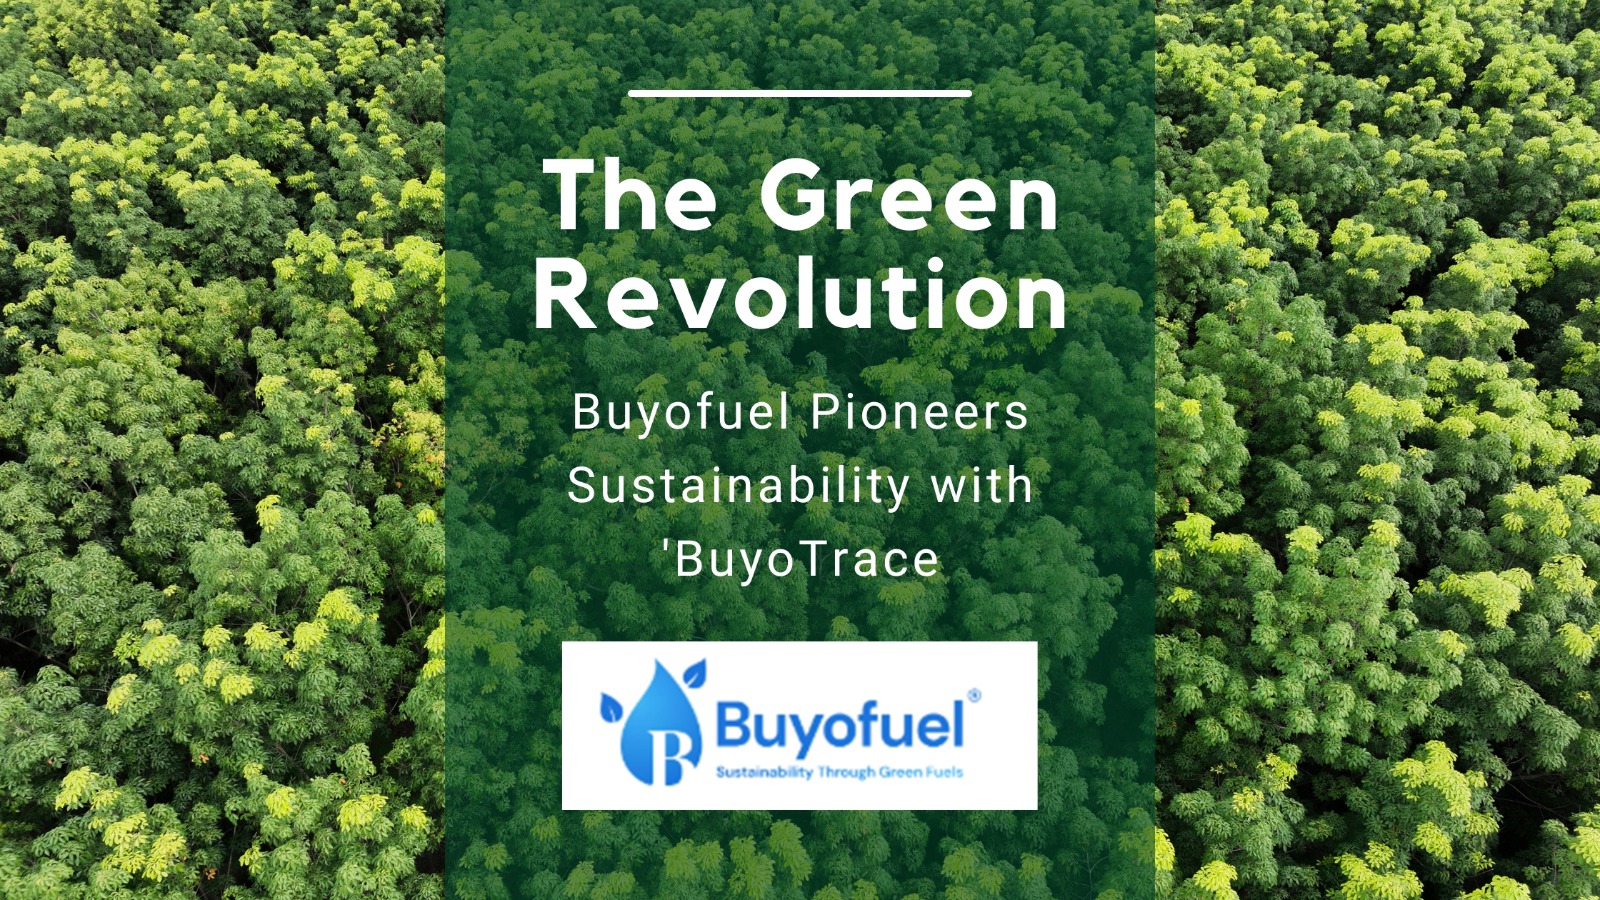 Buyofuel launches first-of-its-kind feature ‘BuyoTrace’ to ensure sustainability and authenticity of biofuels for its consumers